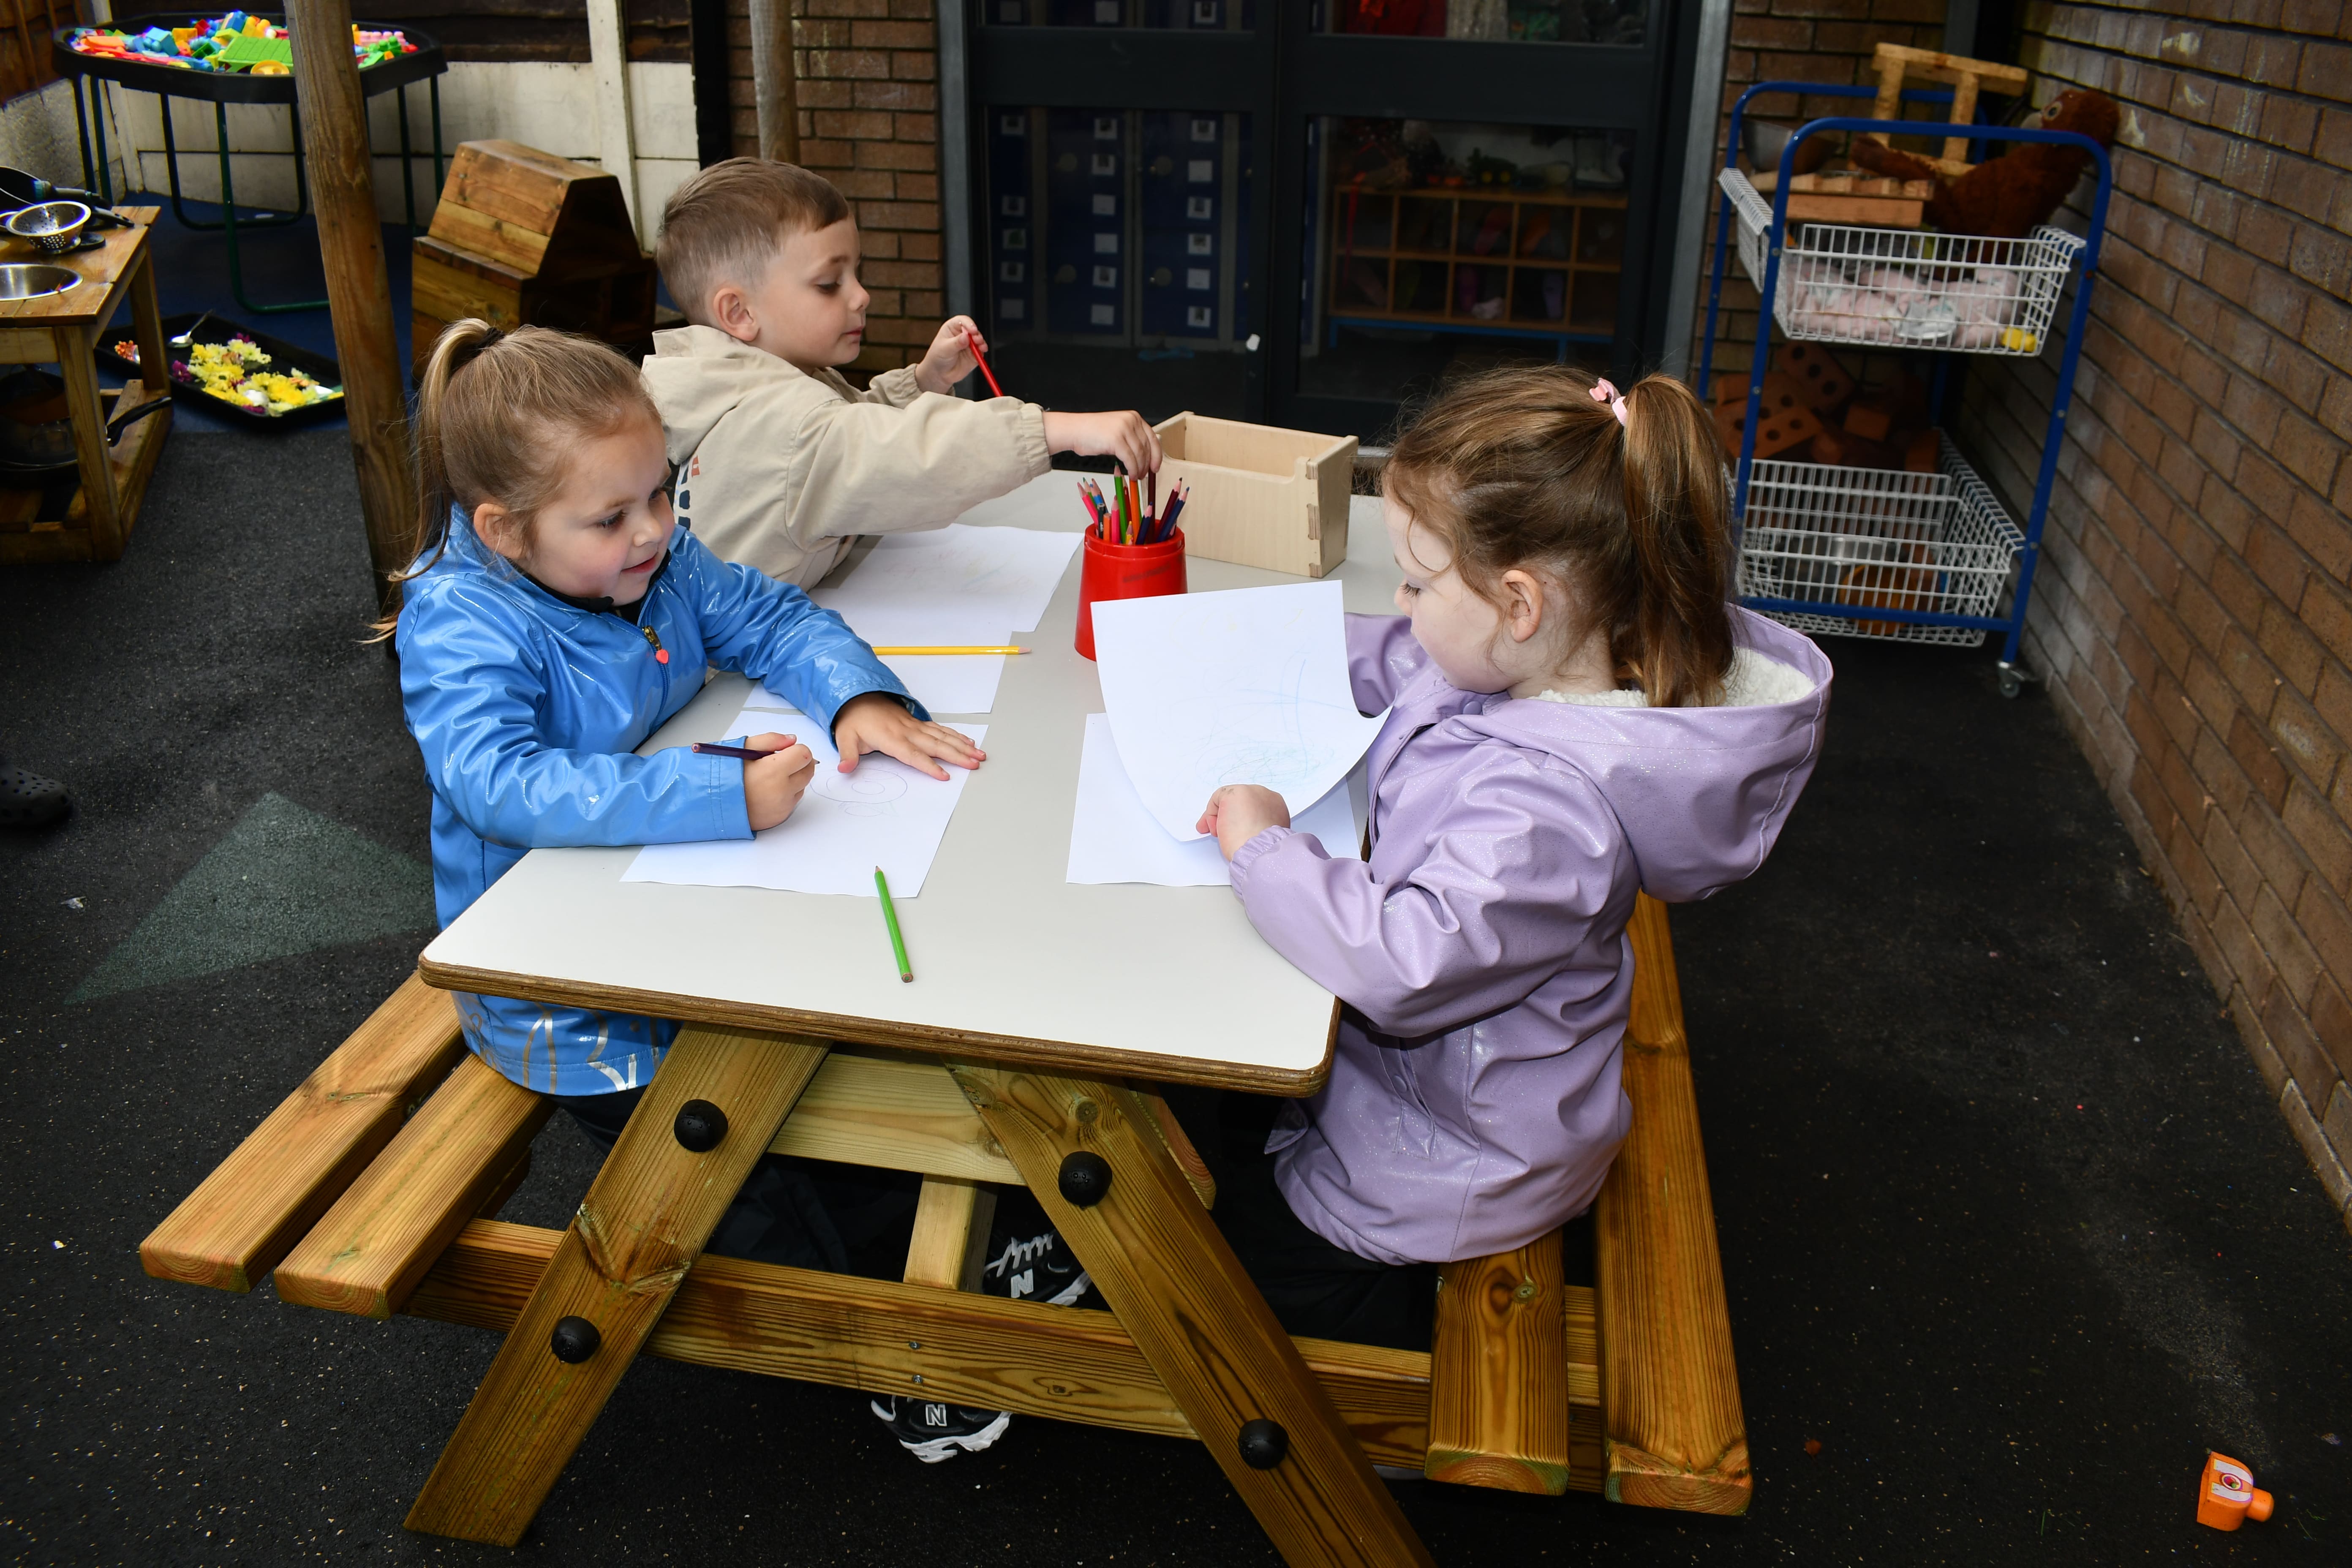 3 children are drawing and colouring in on the EYFS Picnic Bench. The bench is placed on top of a hard surface. The top of the table is covered in paper and pencils.